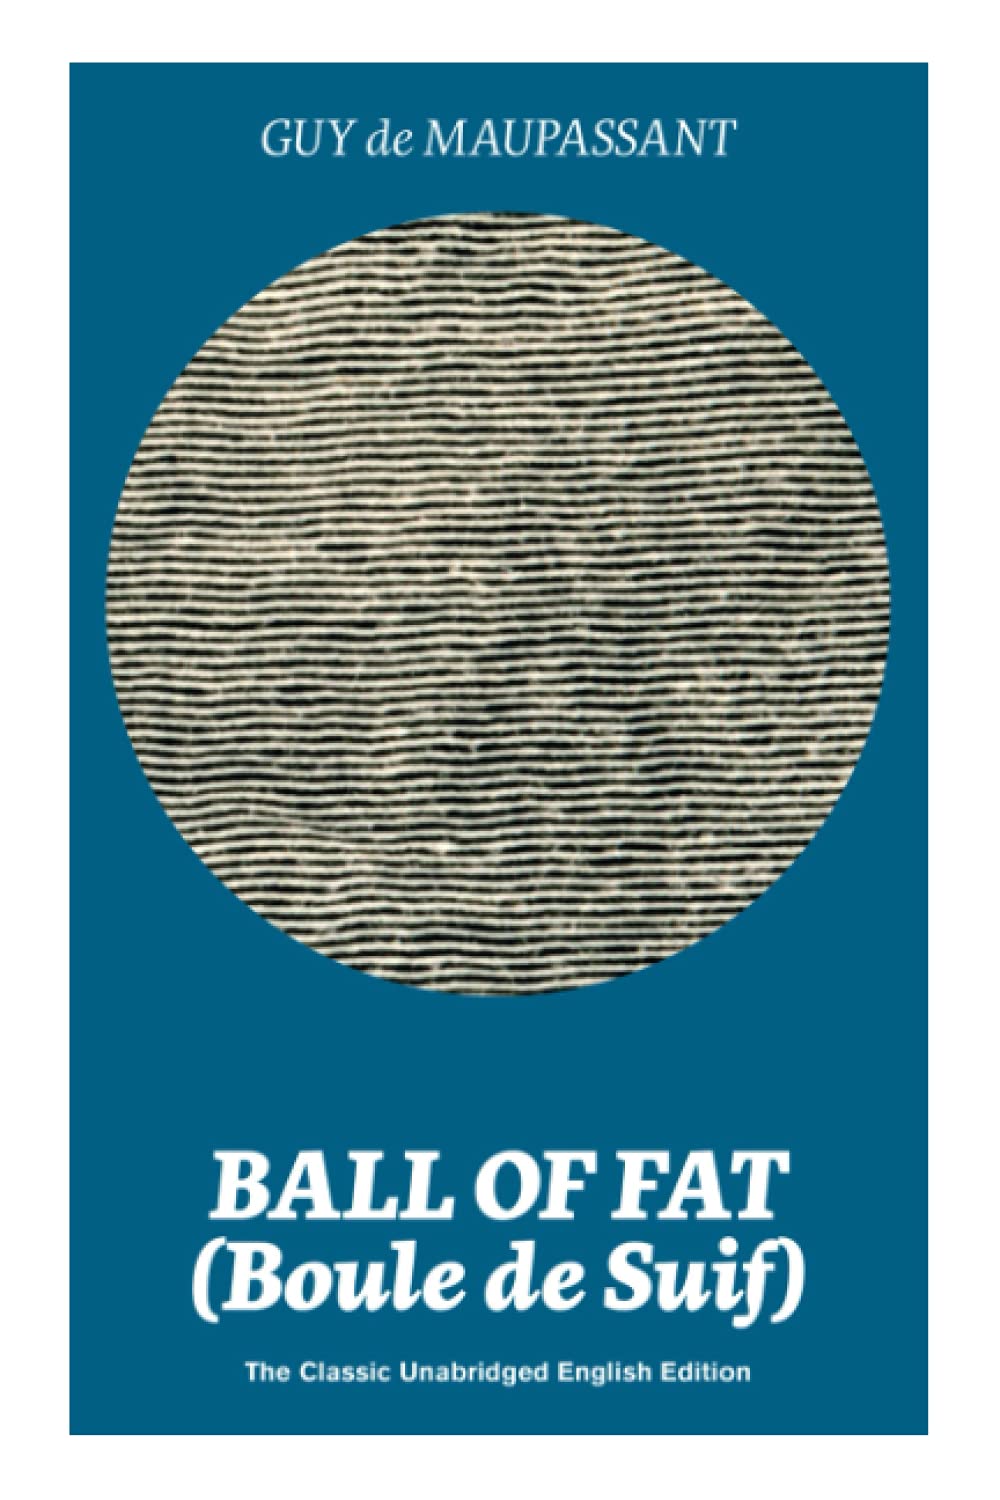 Ball of Fat (Boule de Suif) - The Classic Unabridged English Edition: The True Life Story Behind Uncle Toms Cabin (Paperback)